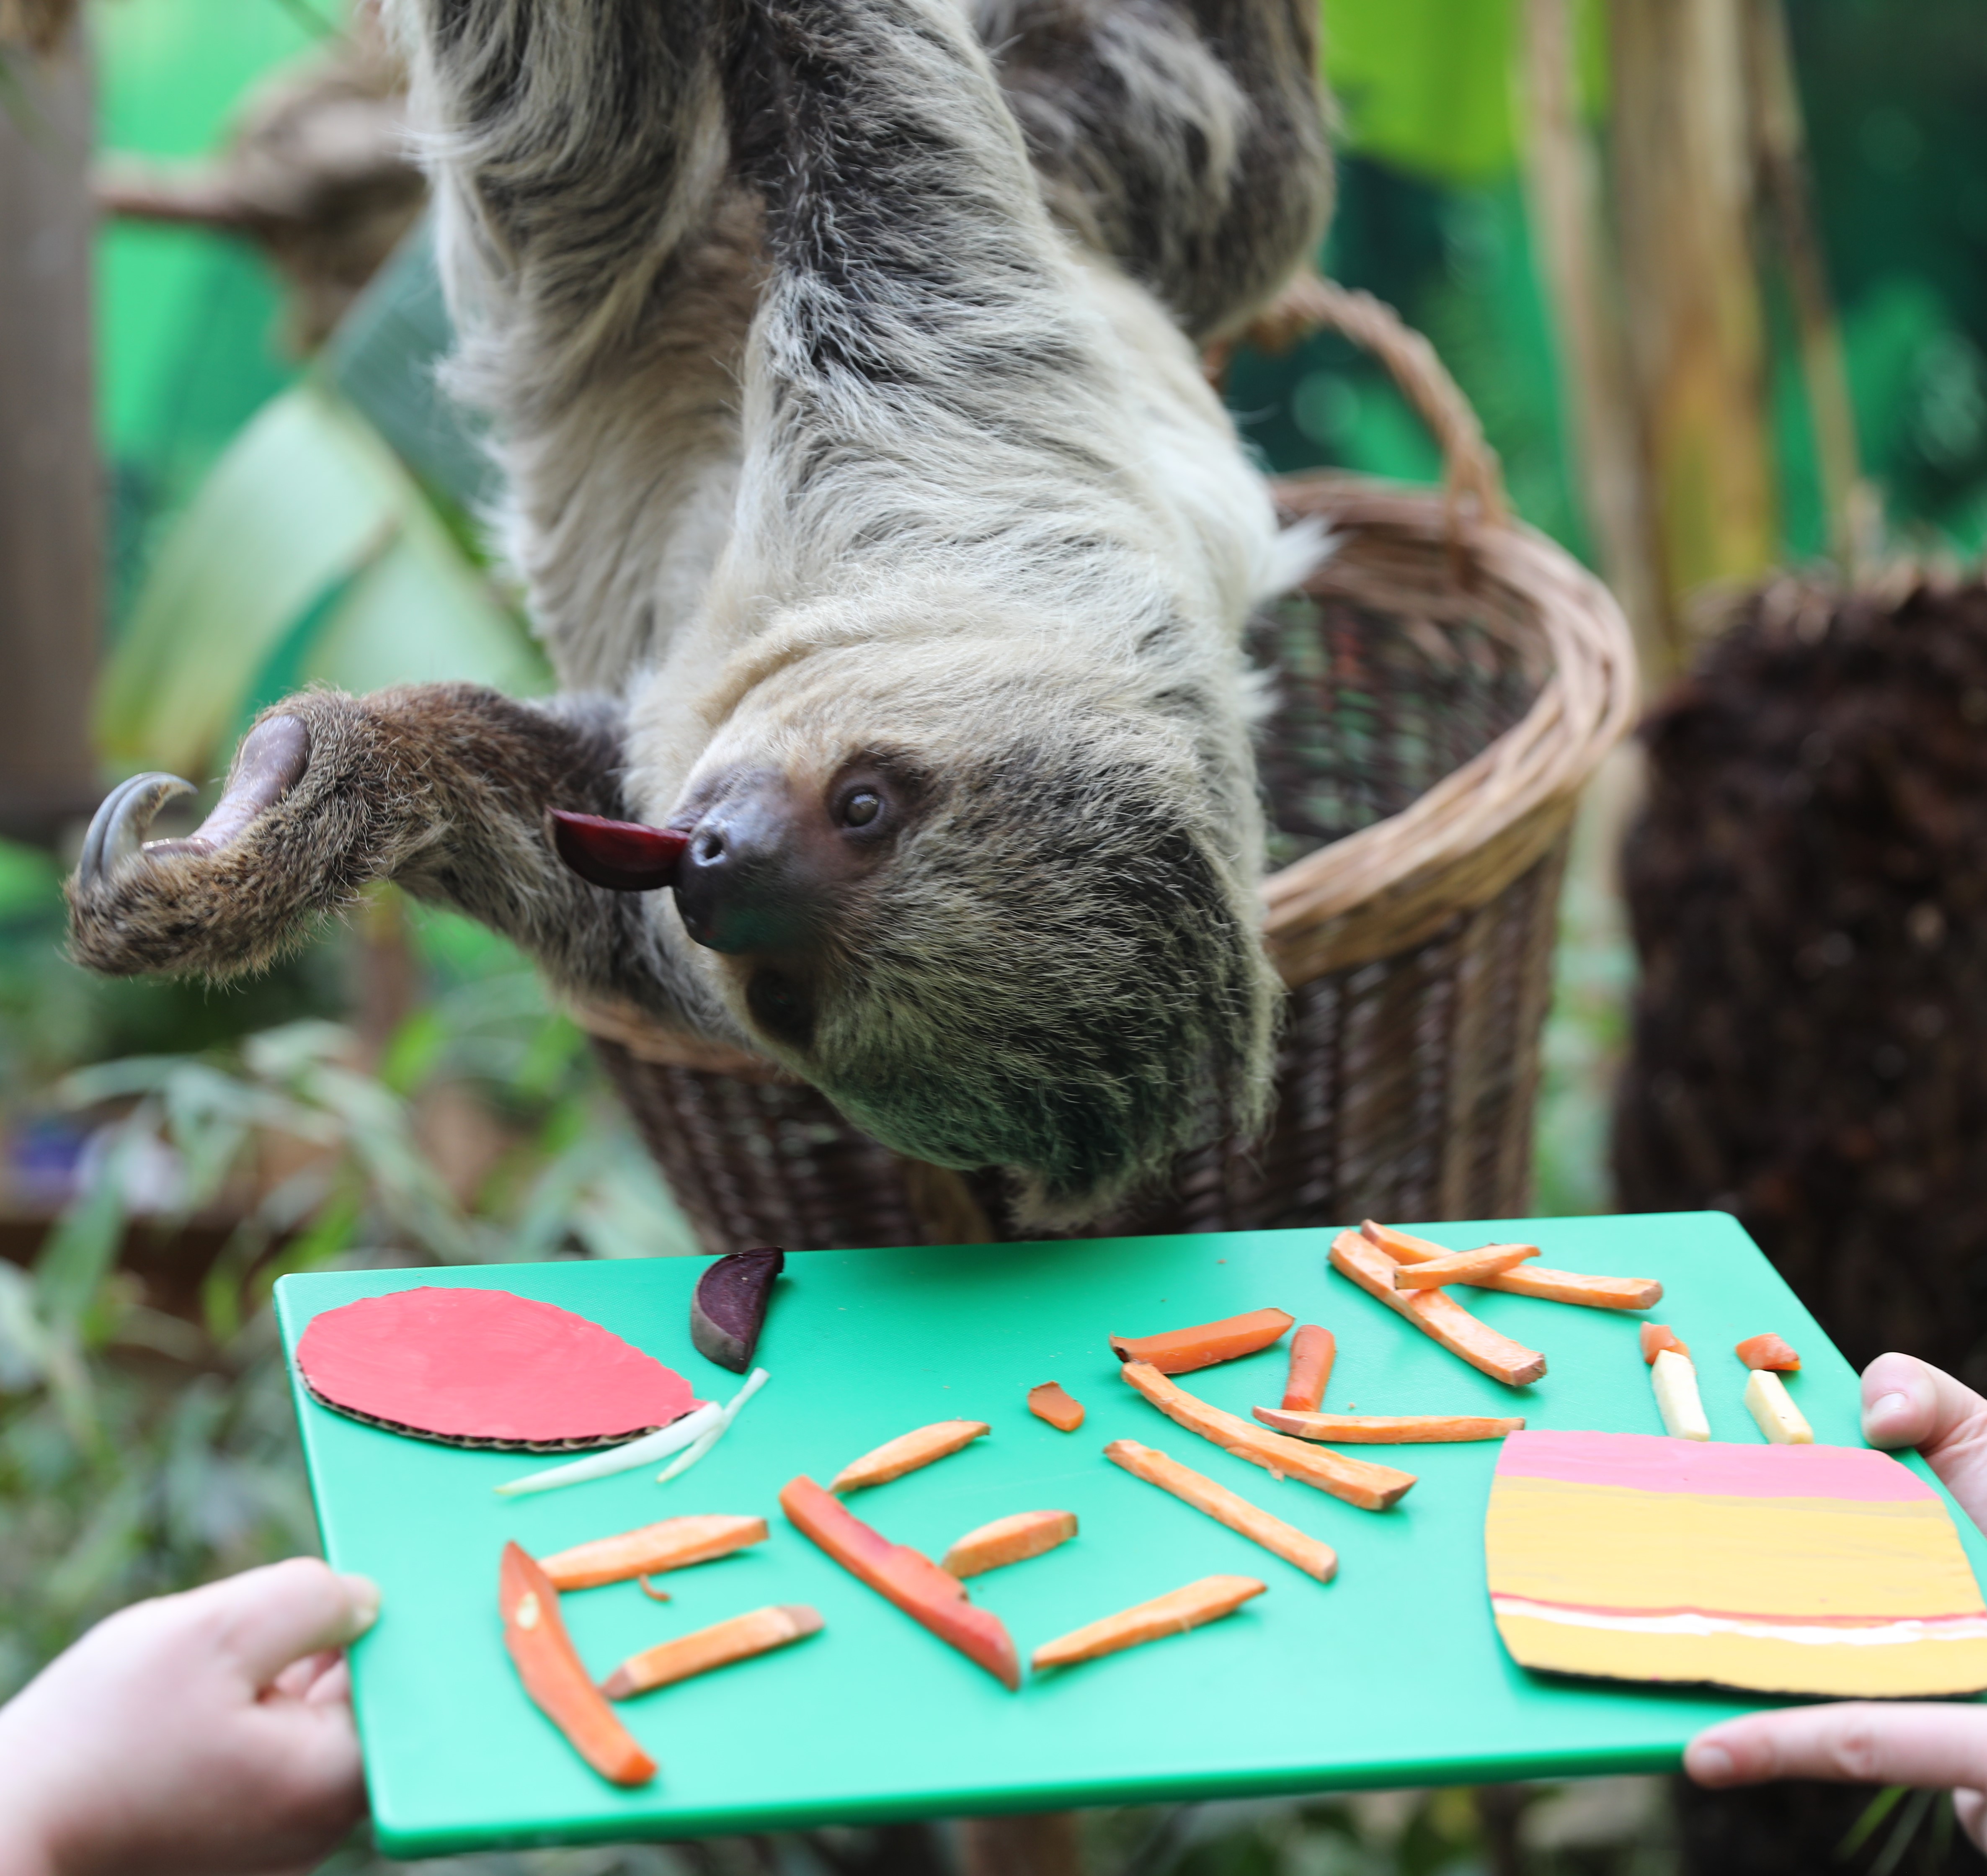 linne's two toed sloth feira hanging upside down eating with her name and a birthday cake spelled in vegetables on a green tray IMAGE: RZSS 2022